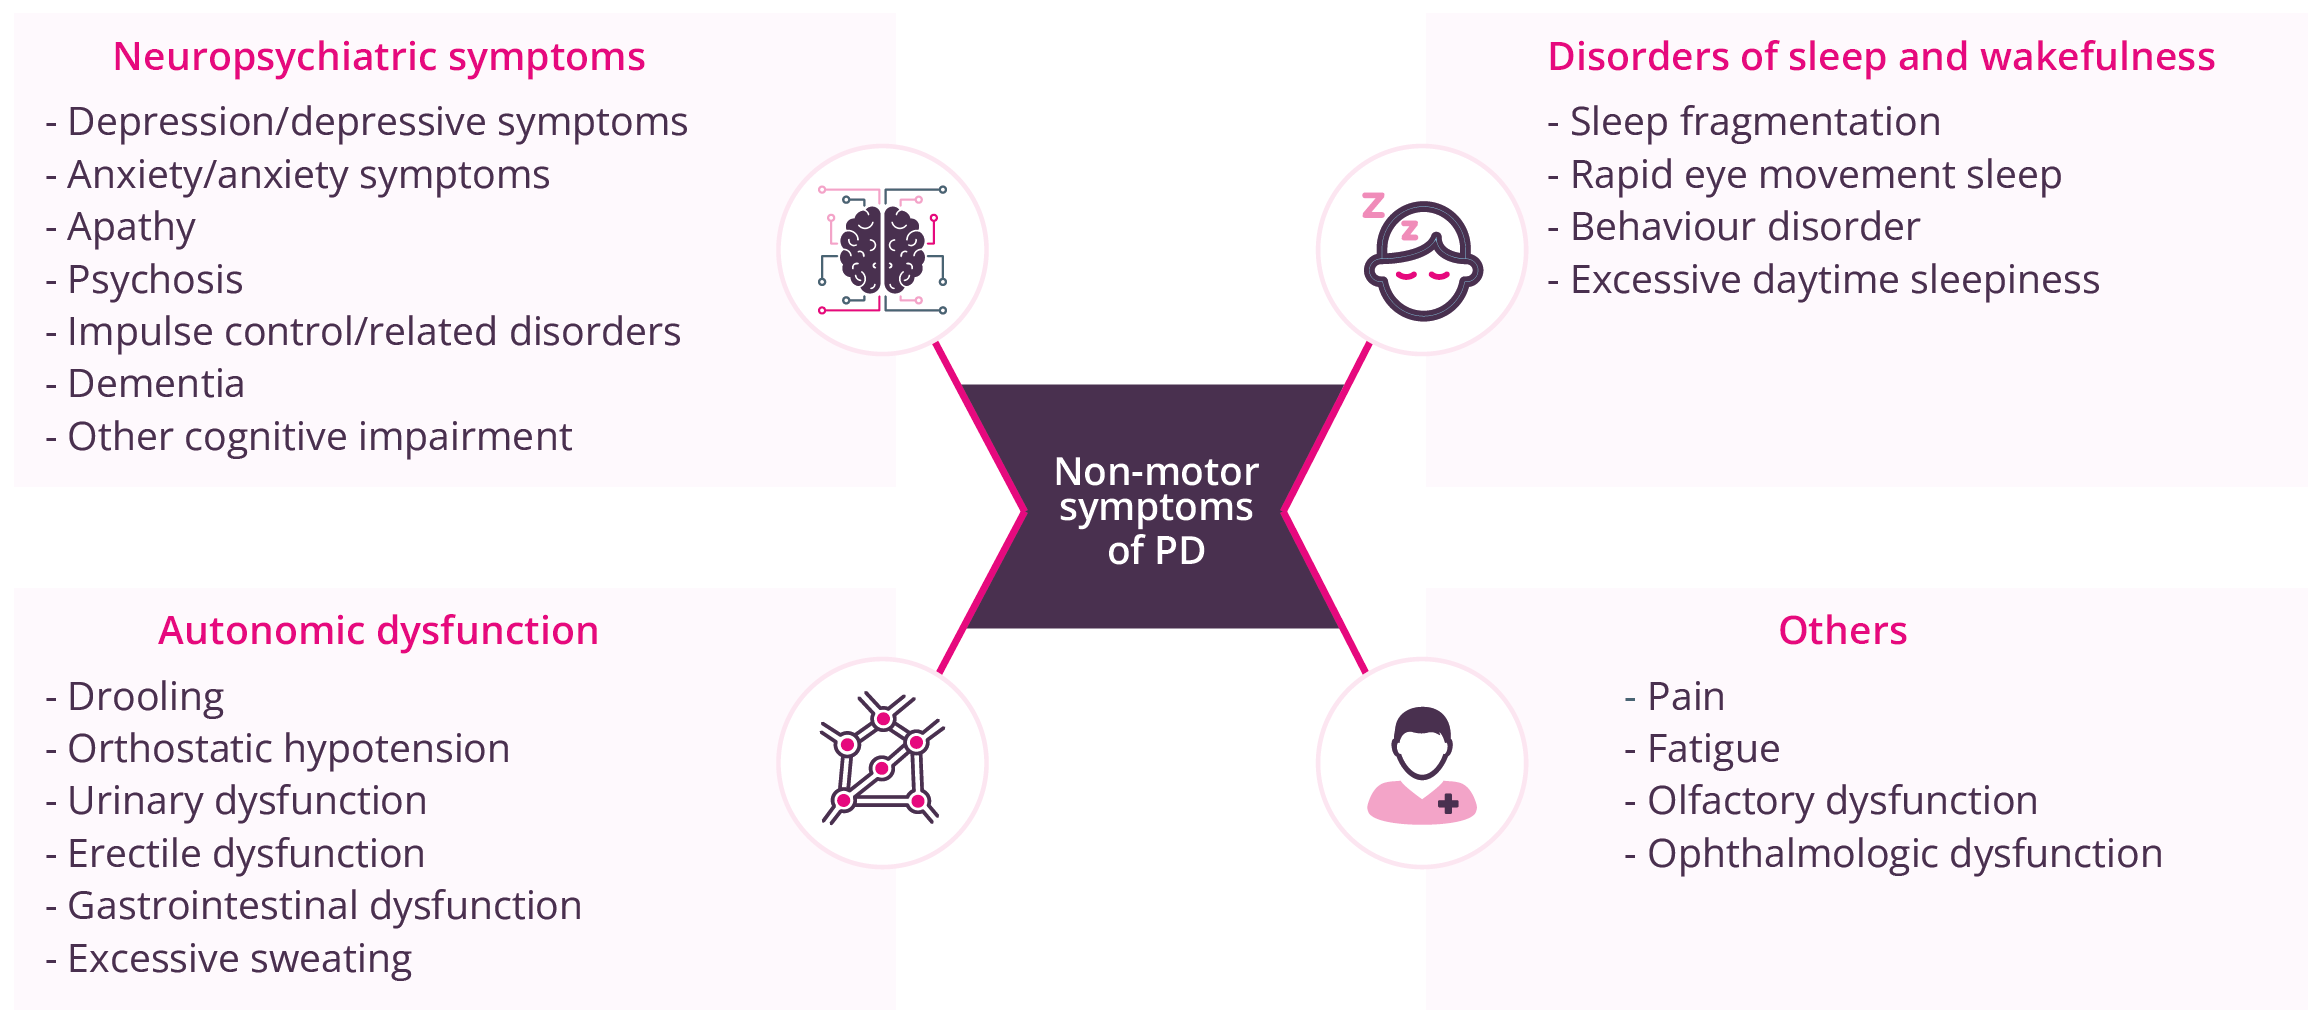 Four categories of non-motor symptoms of PD